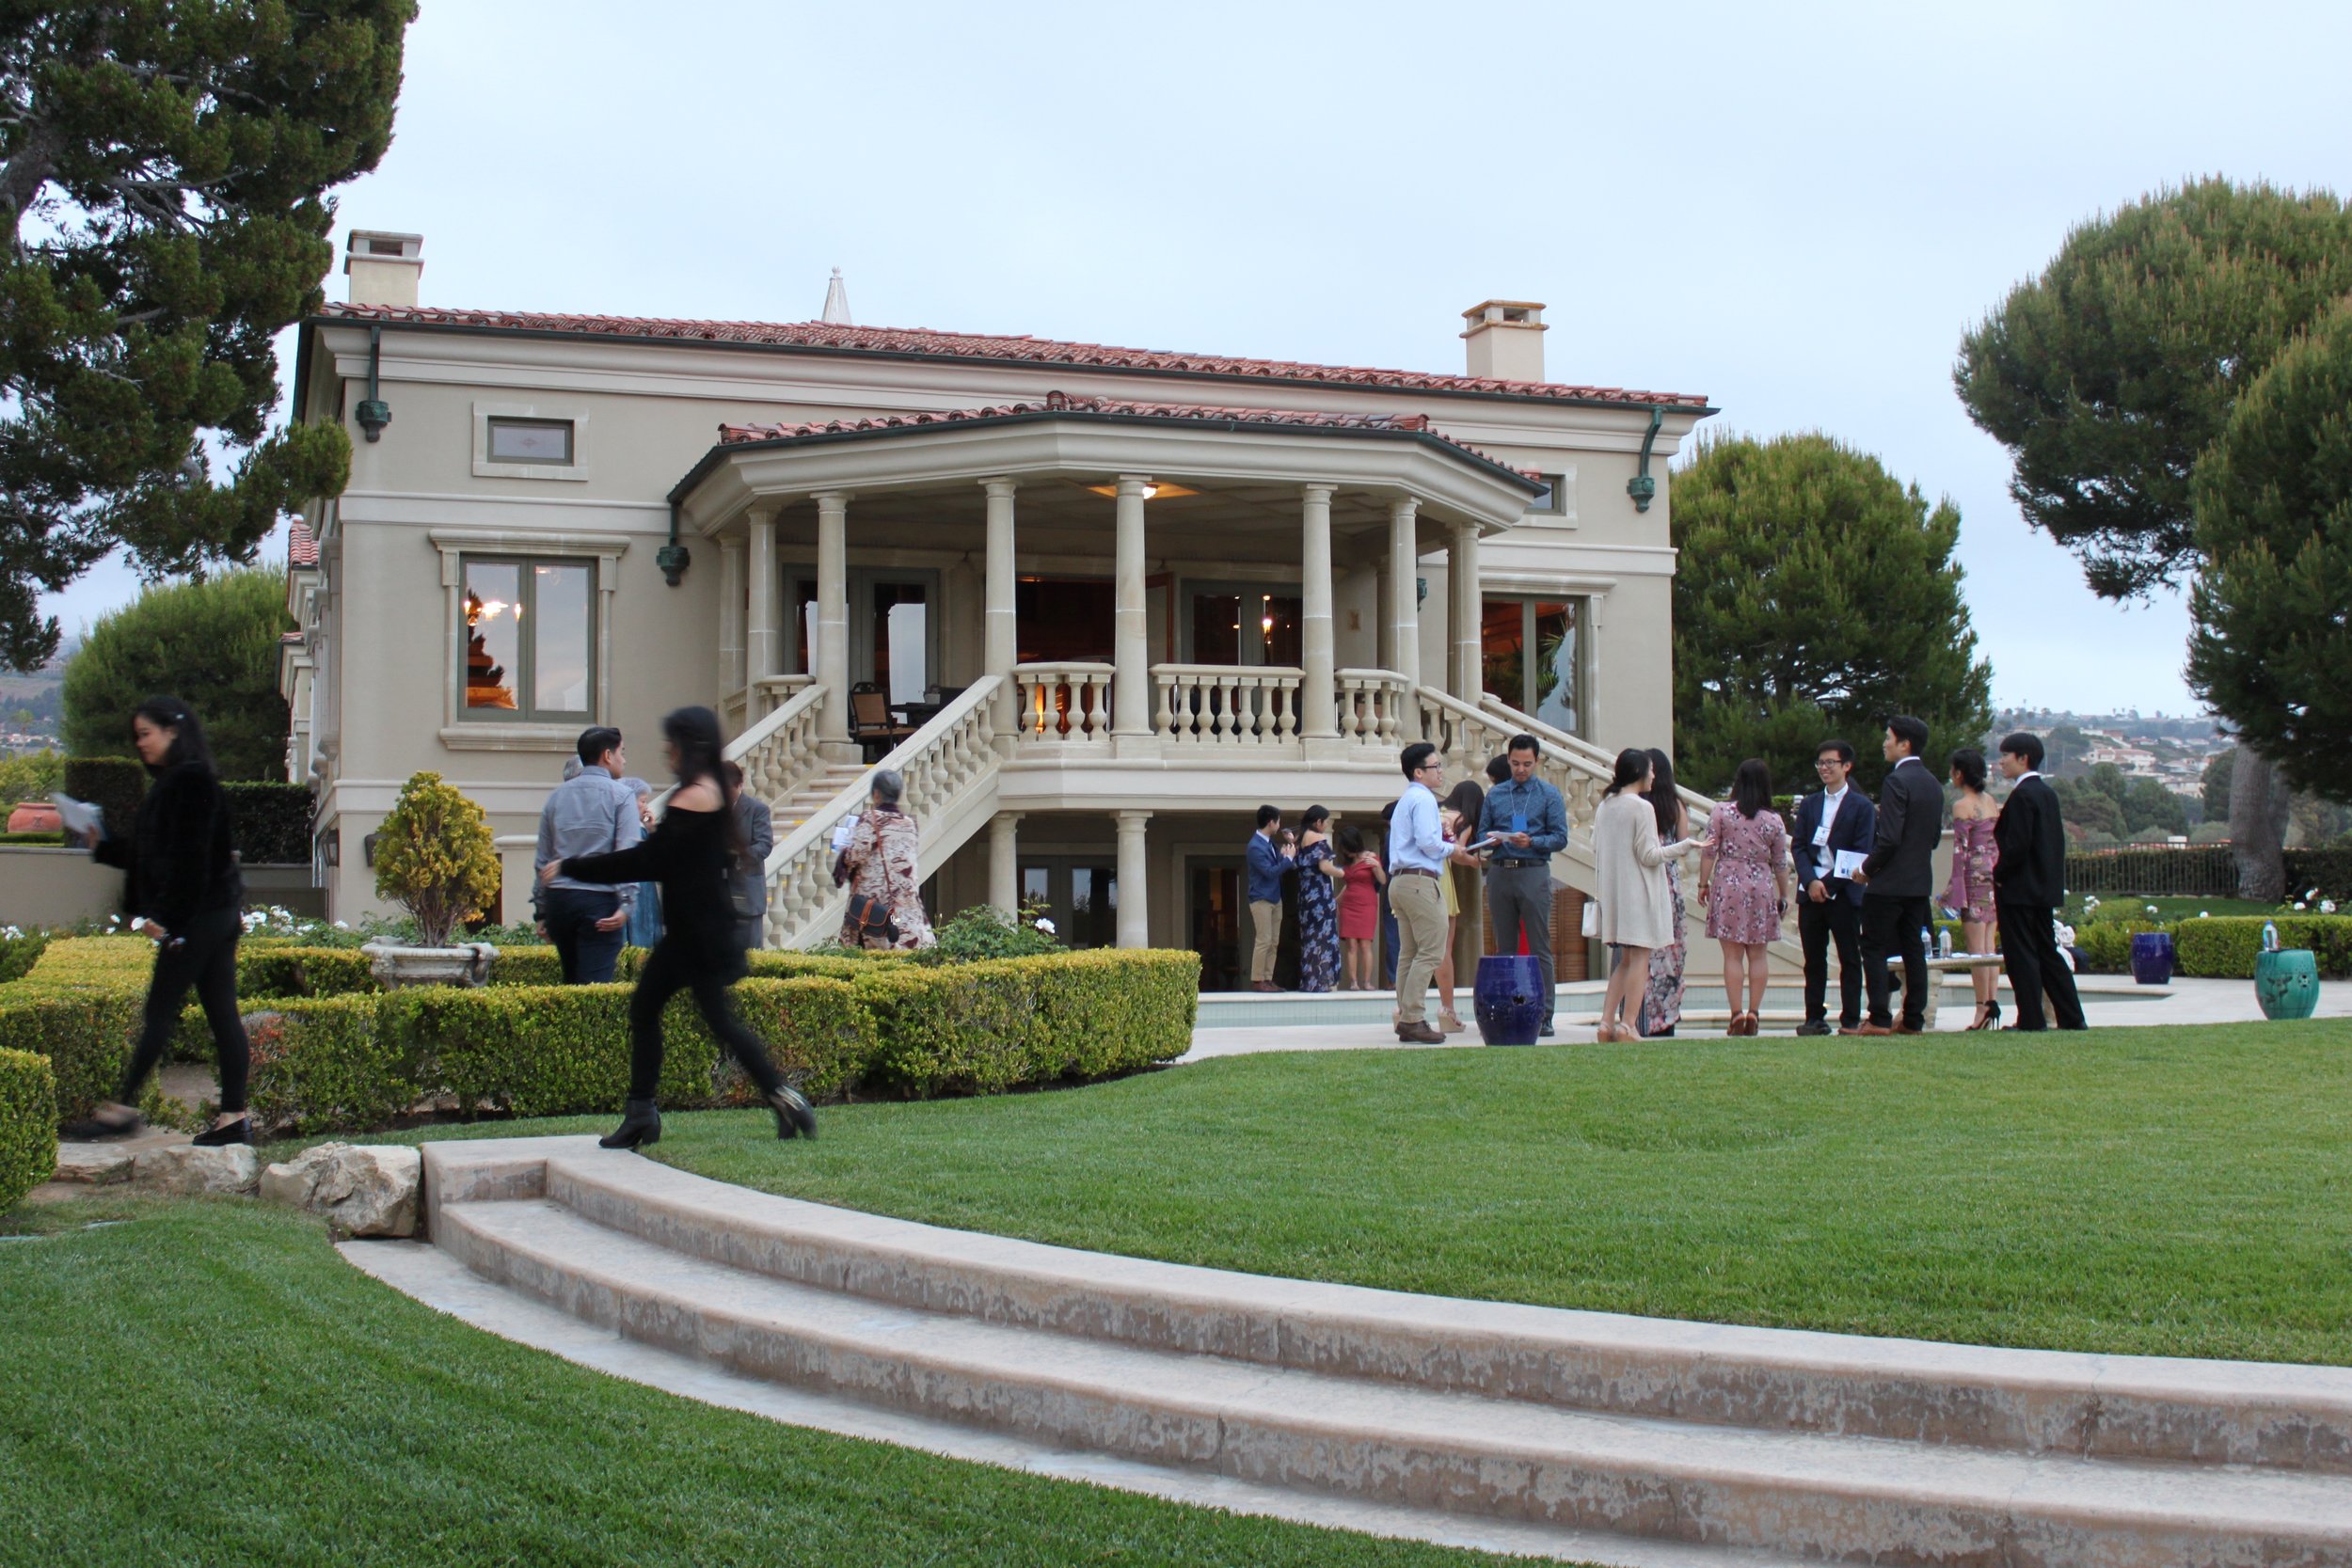 People gather on a lawn with staircases on either side of the building leading up to the terrace in the background.